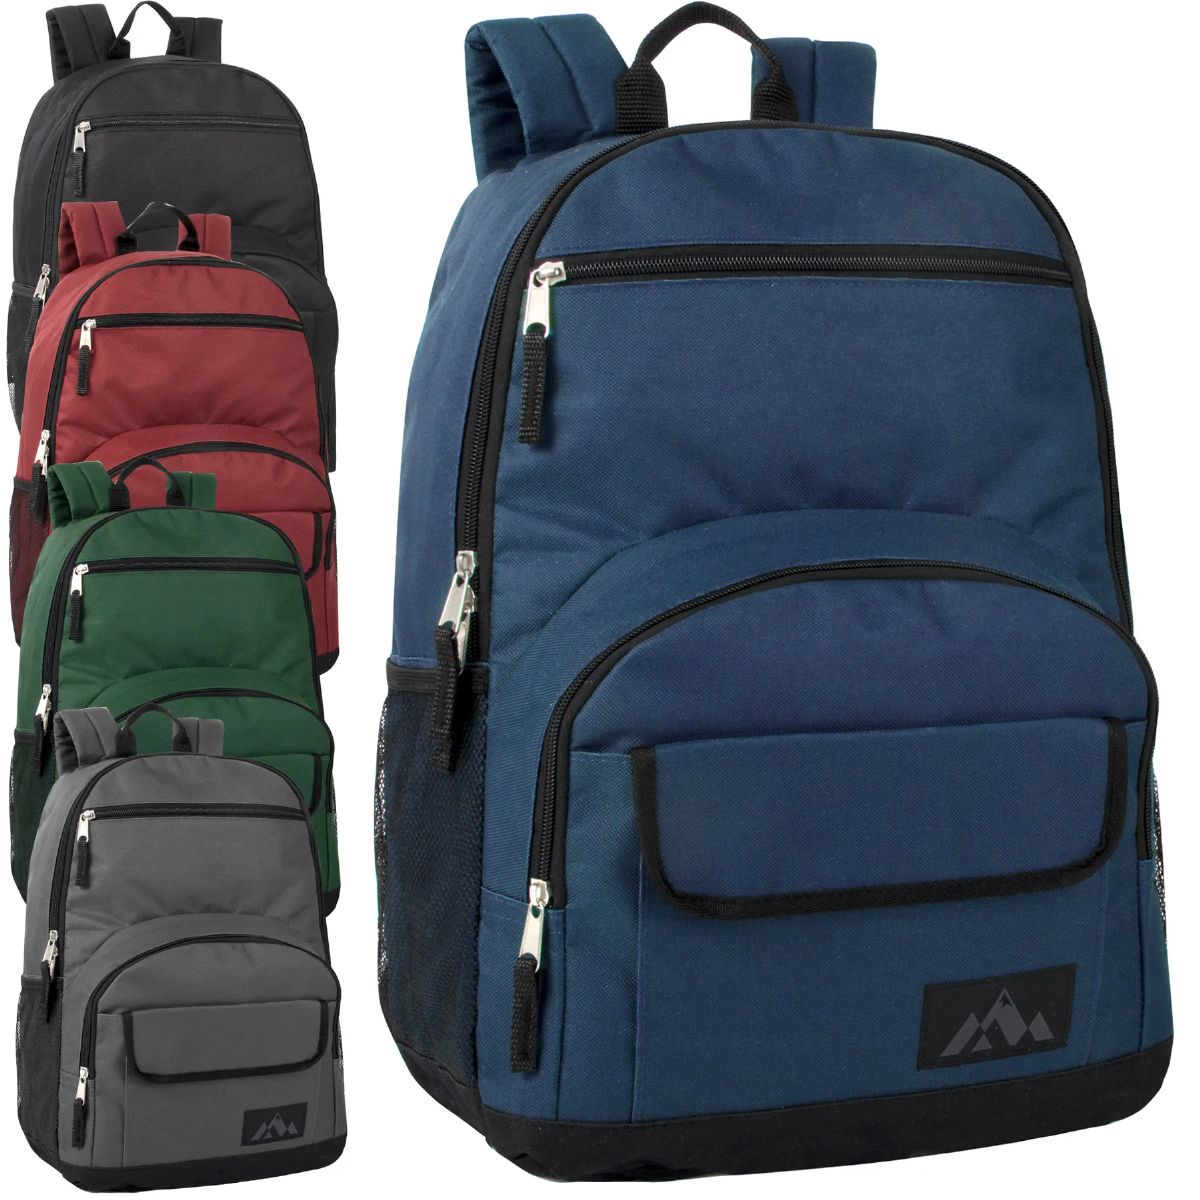 24 Pieces Multi Pocket Function Backpack - 5 Colors - Backpacks 18" or Larger